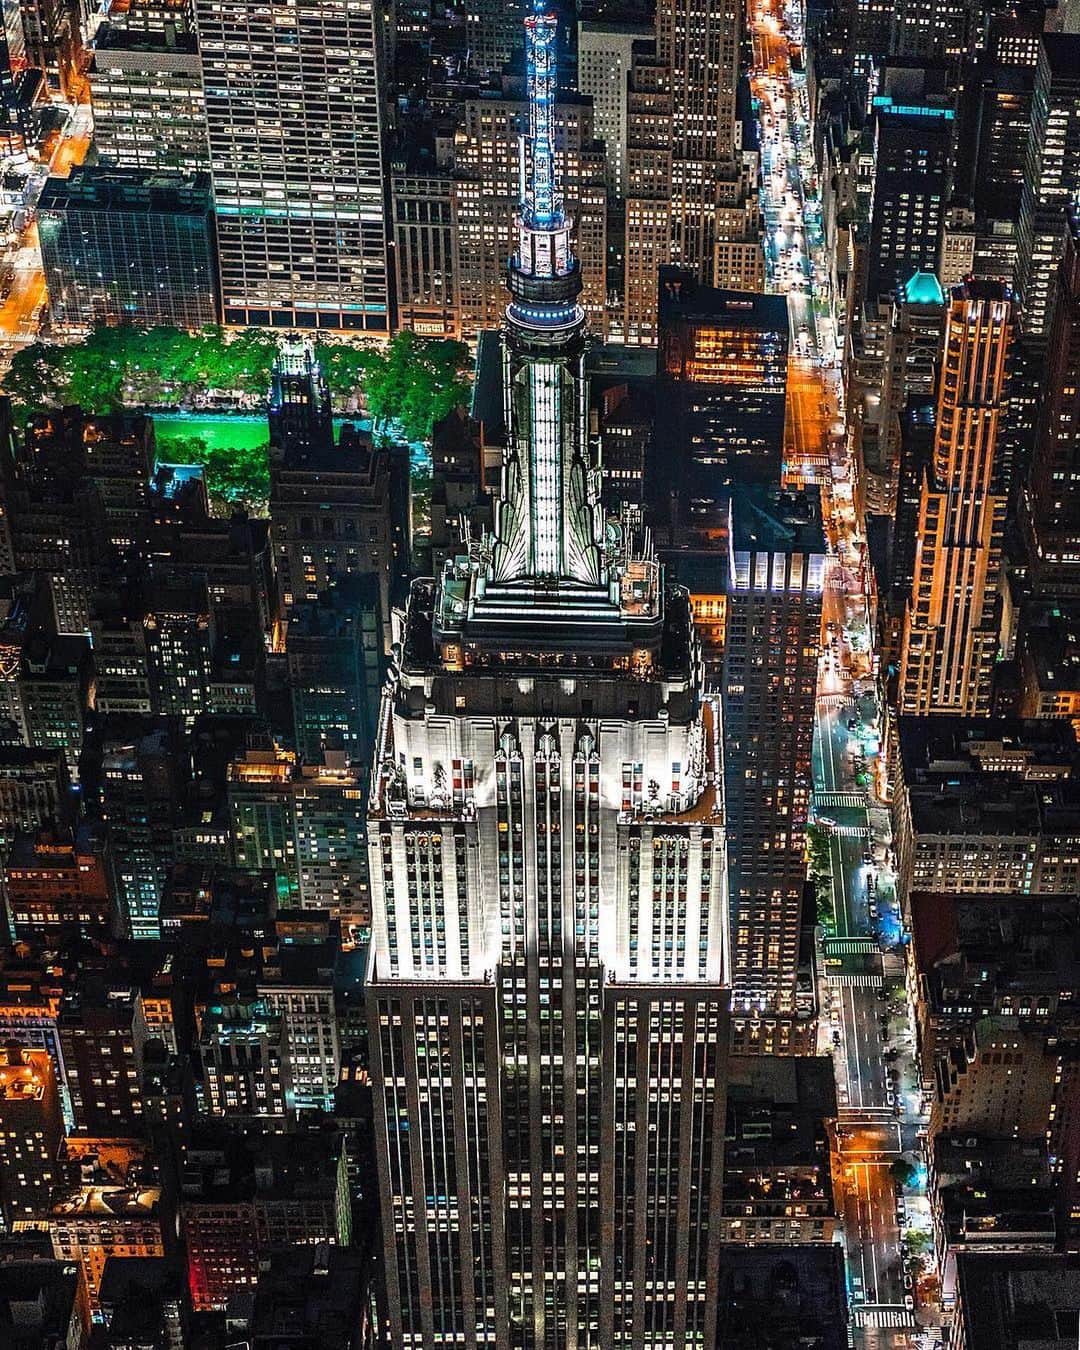 Empire State Buildingさんのインスタグラム写真 - (Empire State BuildingInstagram)「#GIVEAWAY: We’re giving the city that never sleeps one more reason not to: our next #ESBMovieNight giveaway!! ⠀⠀⠀⠀⠀⠀⠀⠀⠀ Like this post & enter below for the chance to win one of 100 $20 free codes for the film “Wall Street: Money Never Sleeps! 💸 ⠀⠀⠀⠀⠀⠀⠀⠀⠀ HOW TO ENTER: 1. Follow the @empirestatebldg on Instagram (we check!) ⭐️ 2. LIKE THIS POST (we check this too!) ❤️ 3. Comment below tagging a friend 👇 ⠀⠀⠀⠀⠀⠀⠀⠀⠀ Unlimited Entries, contest ends 11:59PM tonight! One handle/tag per comment, each comment must be unique. Five lucky winners will also receive an exclusive #EmpireStateBuilding movie pack! Click link in bio for rules and see comments for more details. ⠀⠀⠀⠀⠀⠀⠀⠀⠀ 📷 (ESB): @wantedvisual ⠀⠀⠀⠀⠀⠀⠀⠀⠀ ⠀⠀⠀⠀⠀⠀⠀⠀⠀ ⠀⠀⠀⠀⠀⠀⠀⠀⠀ ⠀⠀⠀⠀⠀⠀⠀⠀⠀ ⠀⠀⠀⠀⠀⠀⠀⠀⠀ ⠀⠀⠀⠀⠀⠀⠀⠀⠀ ⠀⠀⠀⠀⠀⠀⠀⠀⠀ ⠀⠀⠀⠀⠀⠀⠀⠀⠀ ⠀⠀⠀⠀⠀⠀⠀⠀⠀ ⠀⠀⠀⠀⠀⠀⠀⠀⠀ ⠀⠀⠀⠀⠀⠀⠀⠀⠀ ⠀⠀⠀⠀⠀⠀⠀⠀⠀ ⠀⠀⠀⠀⠀⠀⠀⠀⠀ This contest/giveaway is in no way sponsored, endorsed or administered, or associated with Instagram. This giveaway is sponsored by @empirestatebldg, @vudufans & @disney. The contest will run until 11:59PM EST 7/31/20. Entrants must follow @empirestatebldg. Giveaway is open only to residents 18+ years of age, of the 50 United States and District of Columbia. Tap bio link for official rules. A Vudu enabled device and account required for digital viewing. Watch Wall Street: Money Never Sleeps on Digital download © 2020 20th Century Studios」8月1日 1時10分 - empirestatebldg